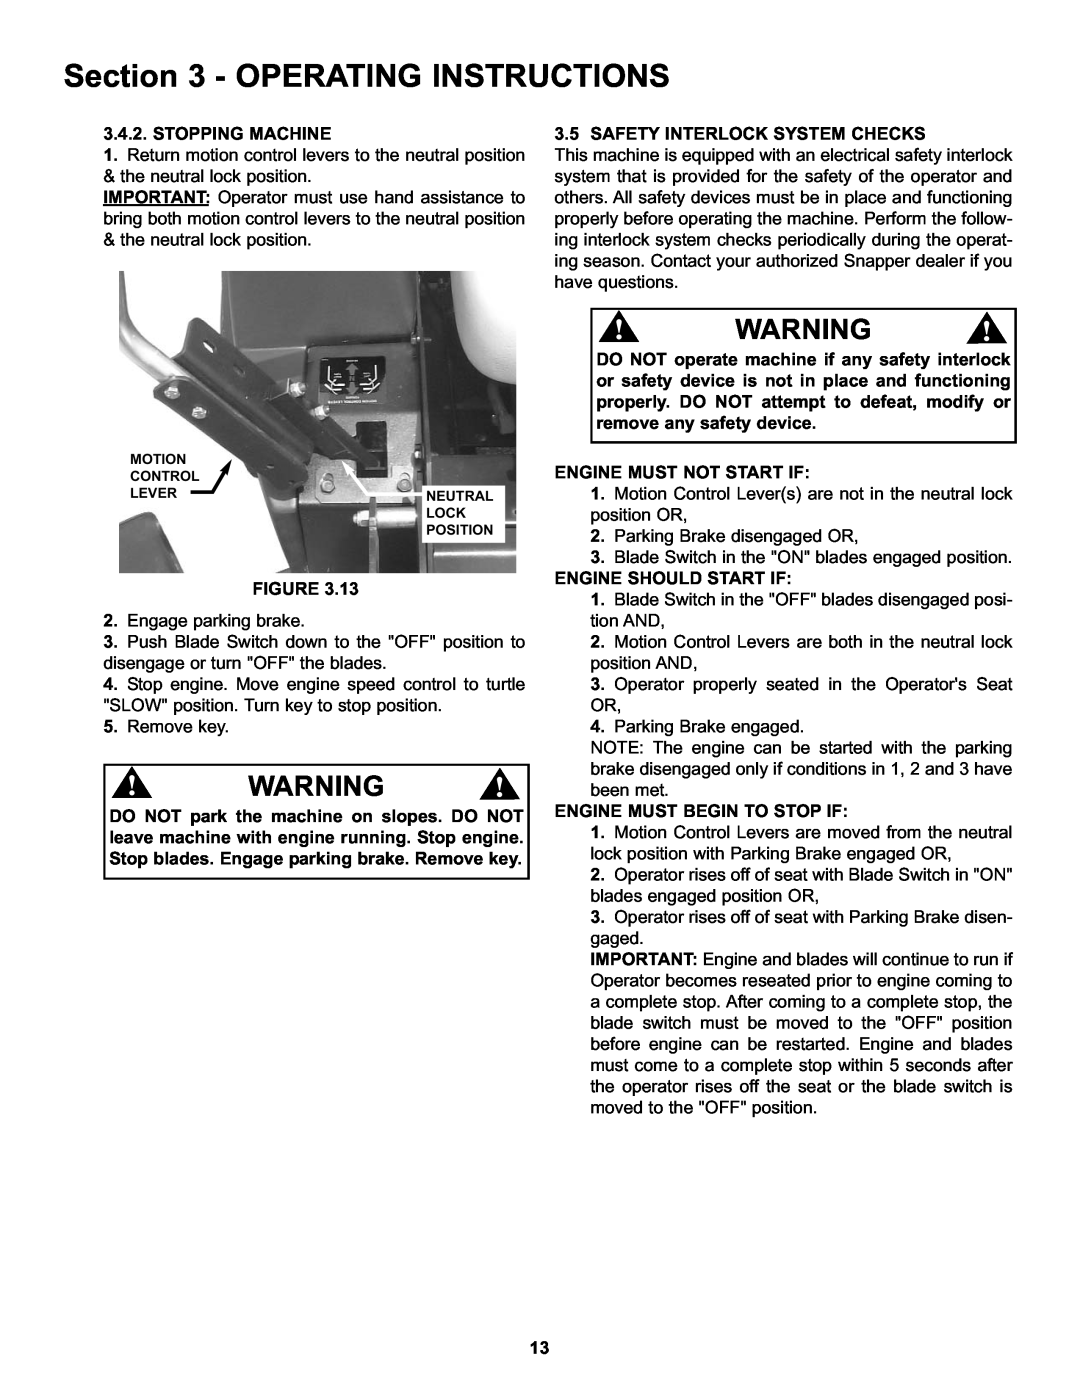 Snapper HZT21481BV important safety instructions Operating Instructions, Stopping Machine 